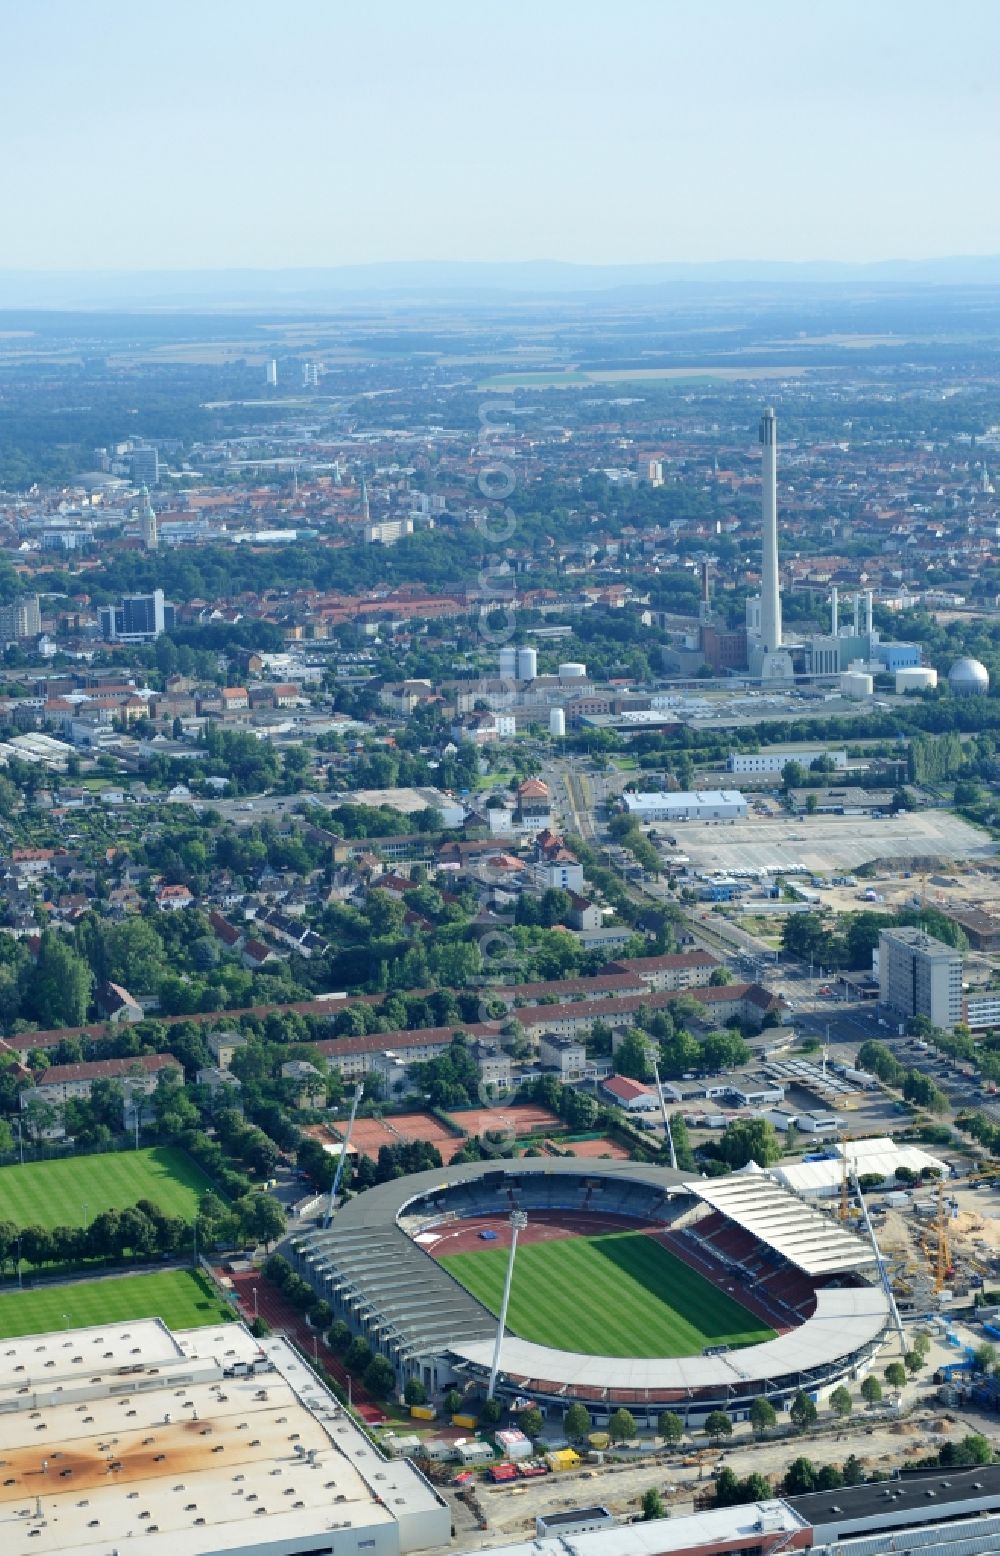 Aerial photograph Braunschweig - Renovations at Eintracht stadium in Brunswick. The stadium was built in 1923 and has capacity for 25,000 spectators. It is the home stadium of the football club Eintracht Braunschweig